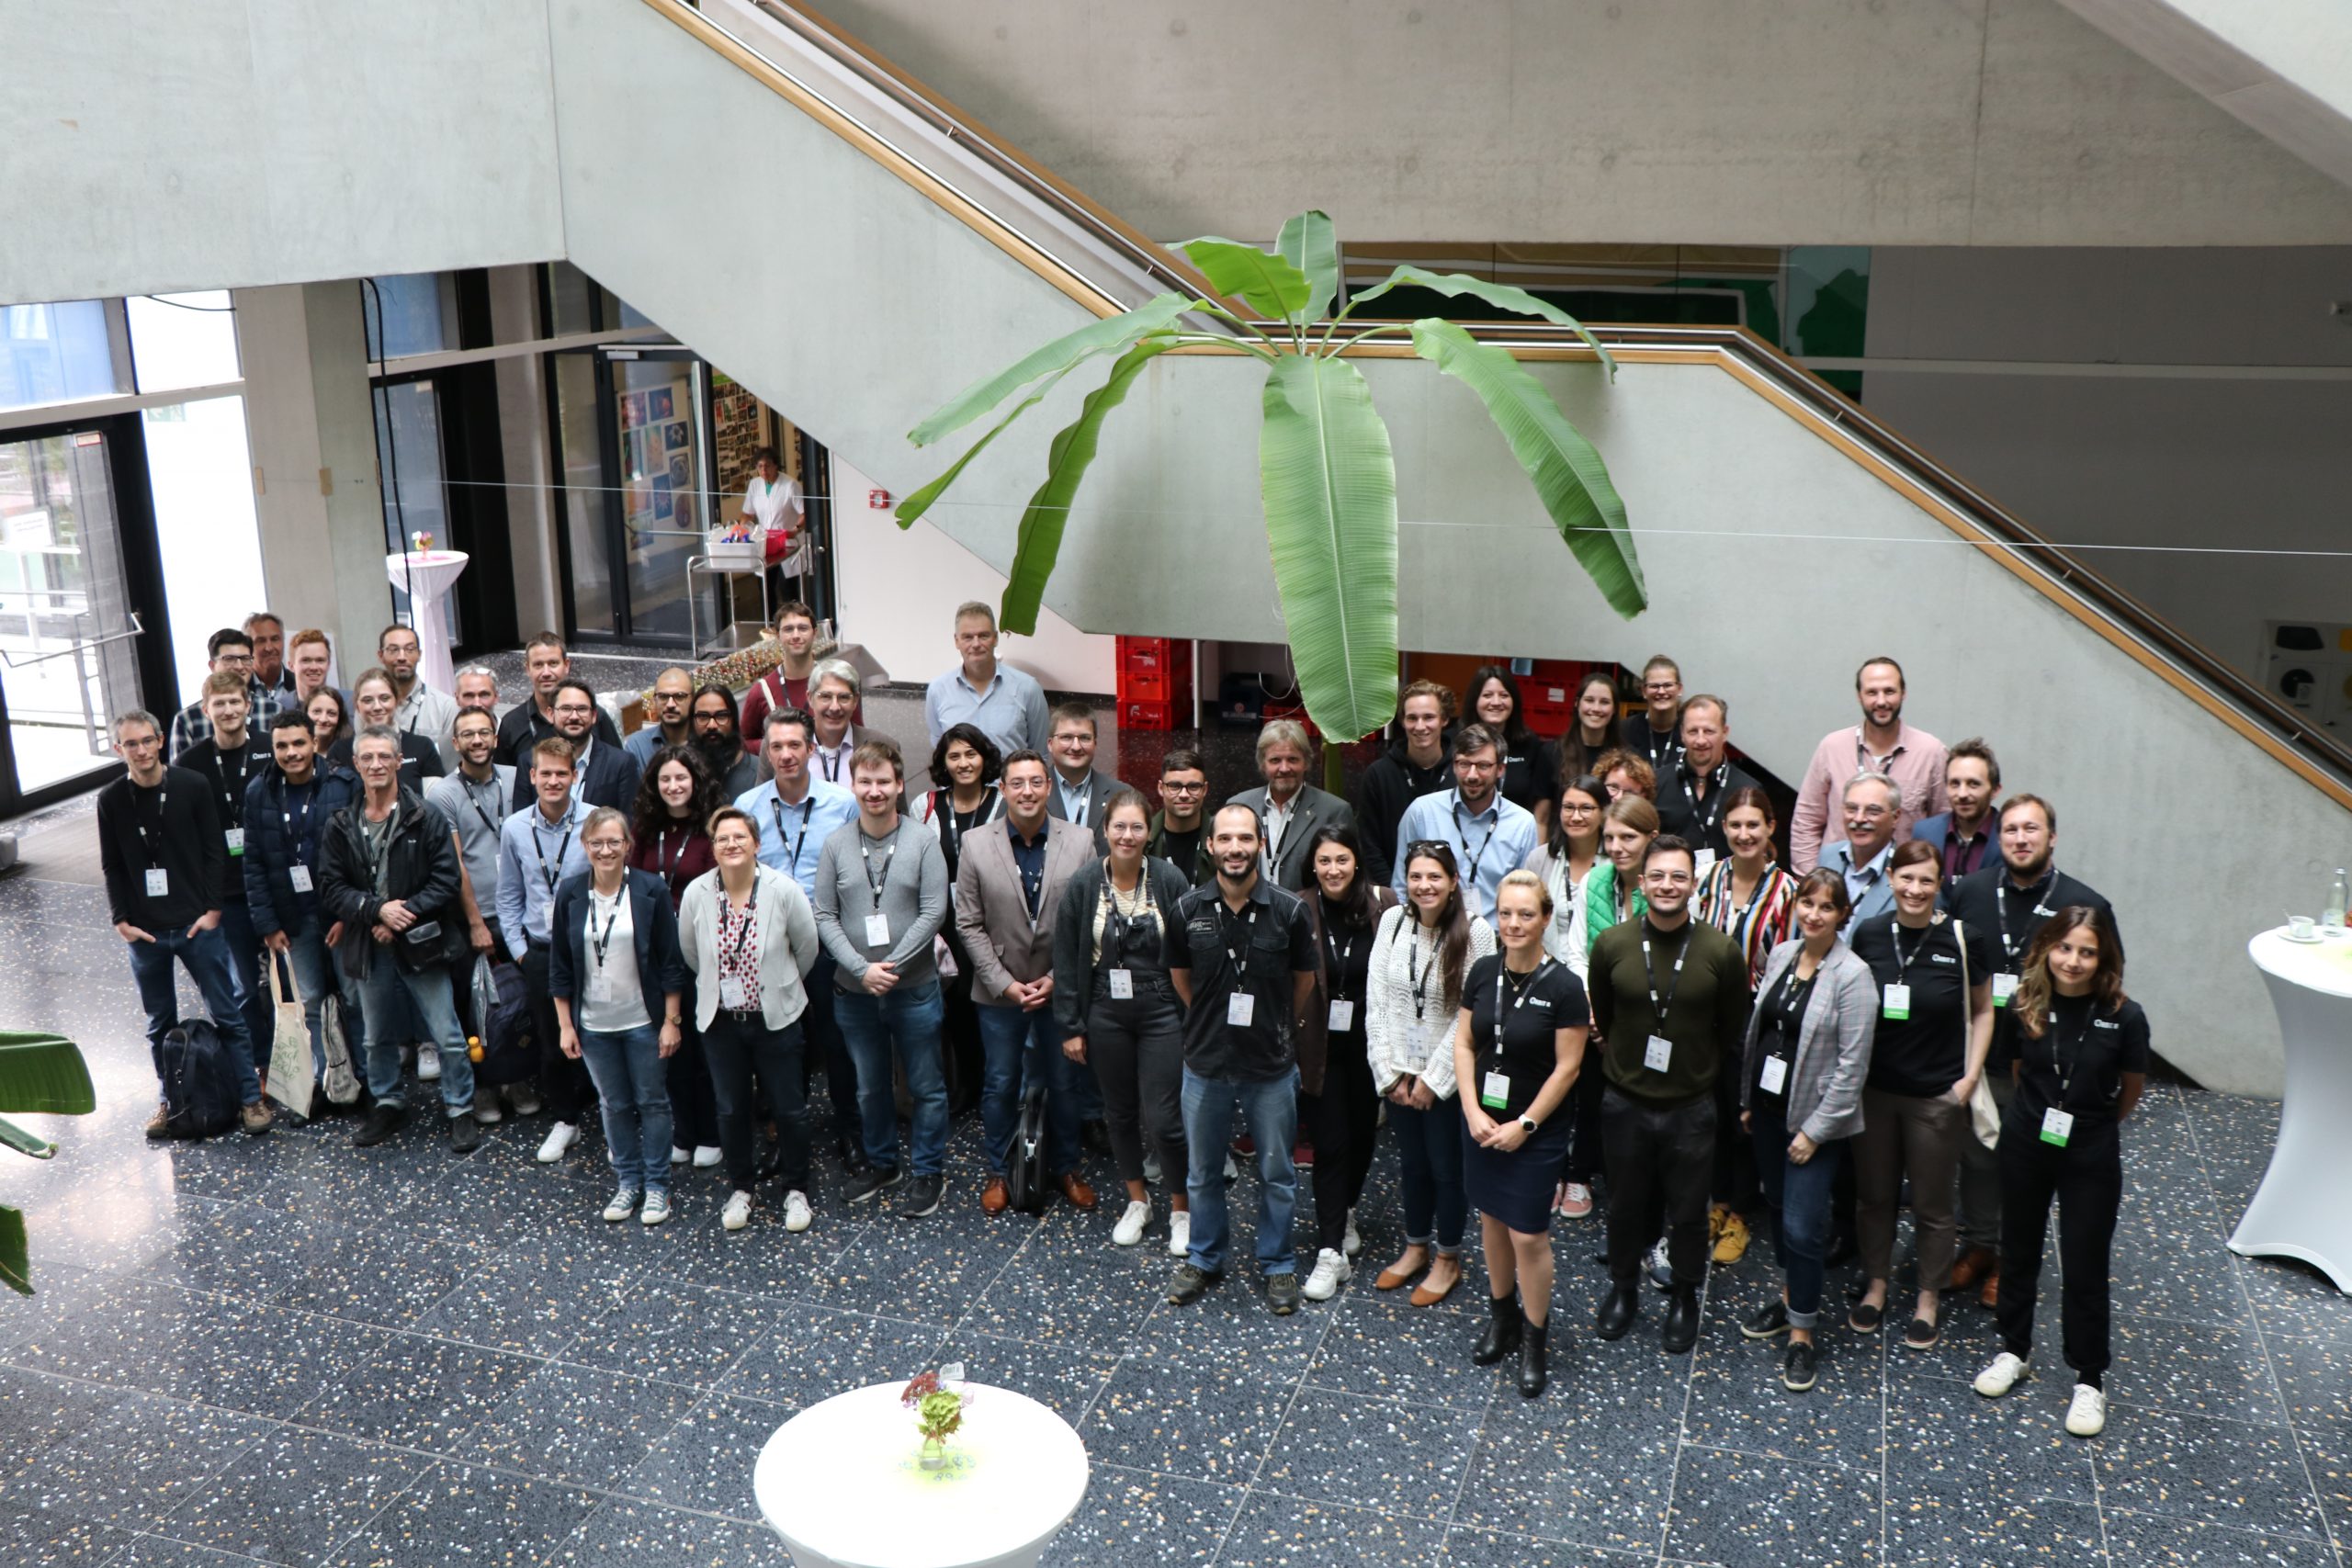 Group photo of the participants at the 2nd ORBIT Workshop. Photo: Gabi Gmeinwieser